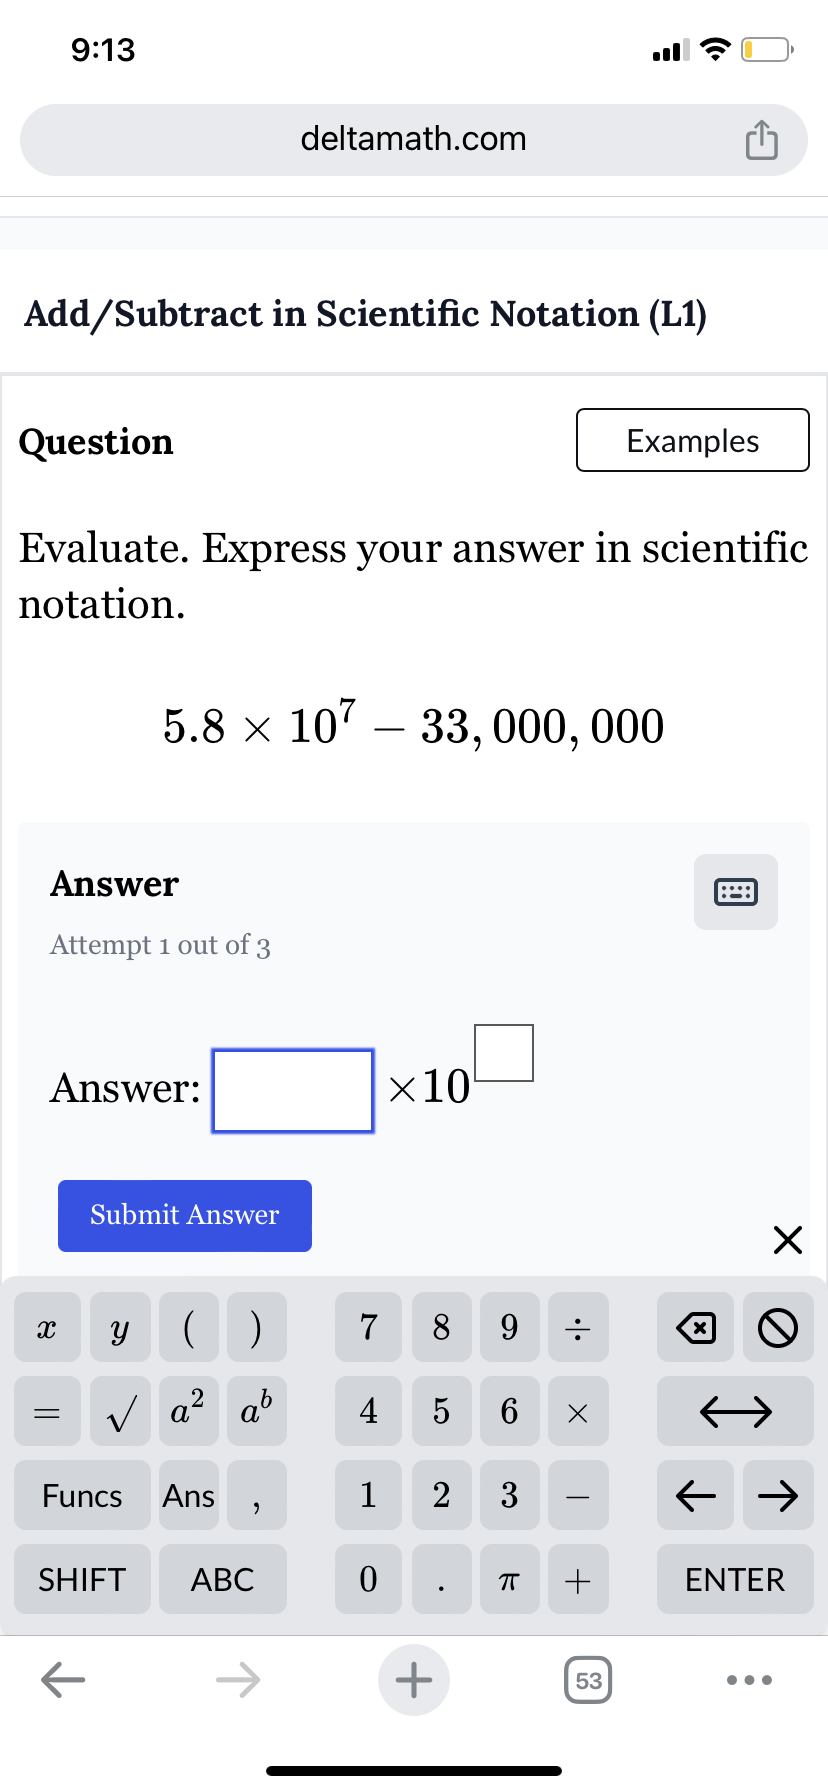 9:13
deltamath.com
ė
Add/Subtract in Scientific Notation (L1)
Question
Examples
Evaluate. Express your answer in scientific
notation.
5.8 × 107
- 33, 000, 000
Answer
Attempt 1 out of 3
Answer:
Submit Answer
×10
X
У
()
7
8
9
=
√ a² ab
2
4
5
6 Х
Funcs
Ans
1
2 3
,
SHIFT ABC
0
П
+
←
+
53
☑
::::
☑
0
← →
ENTER